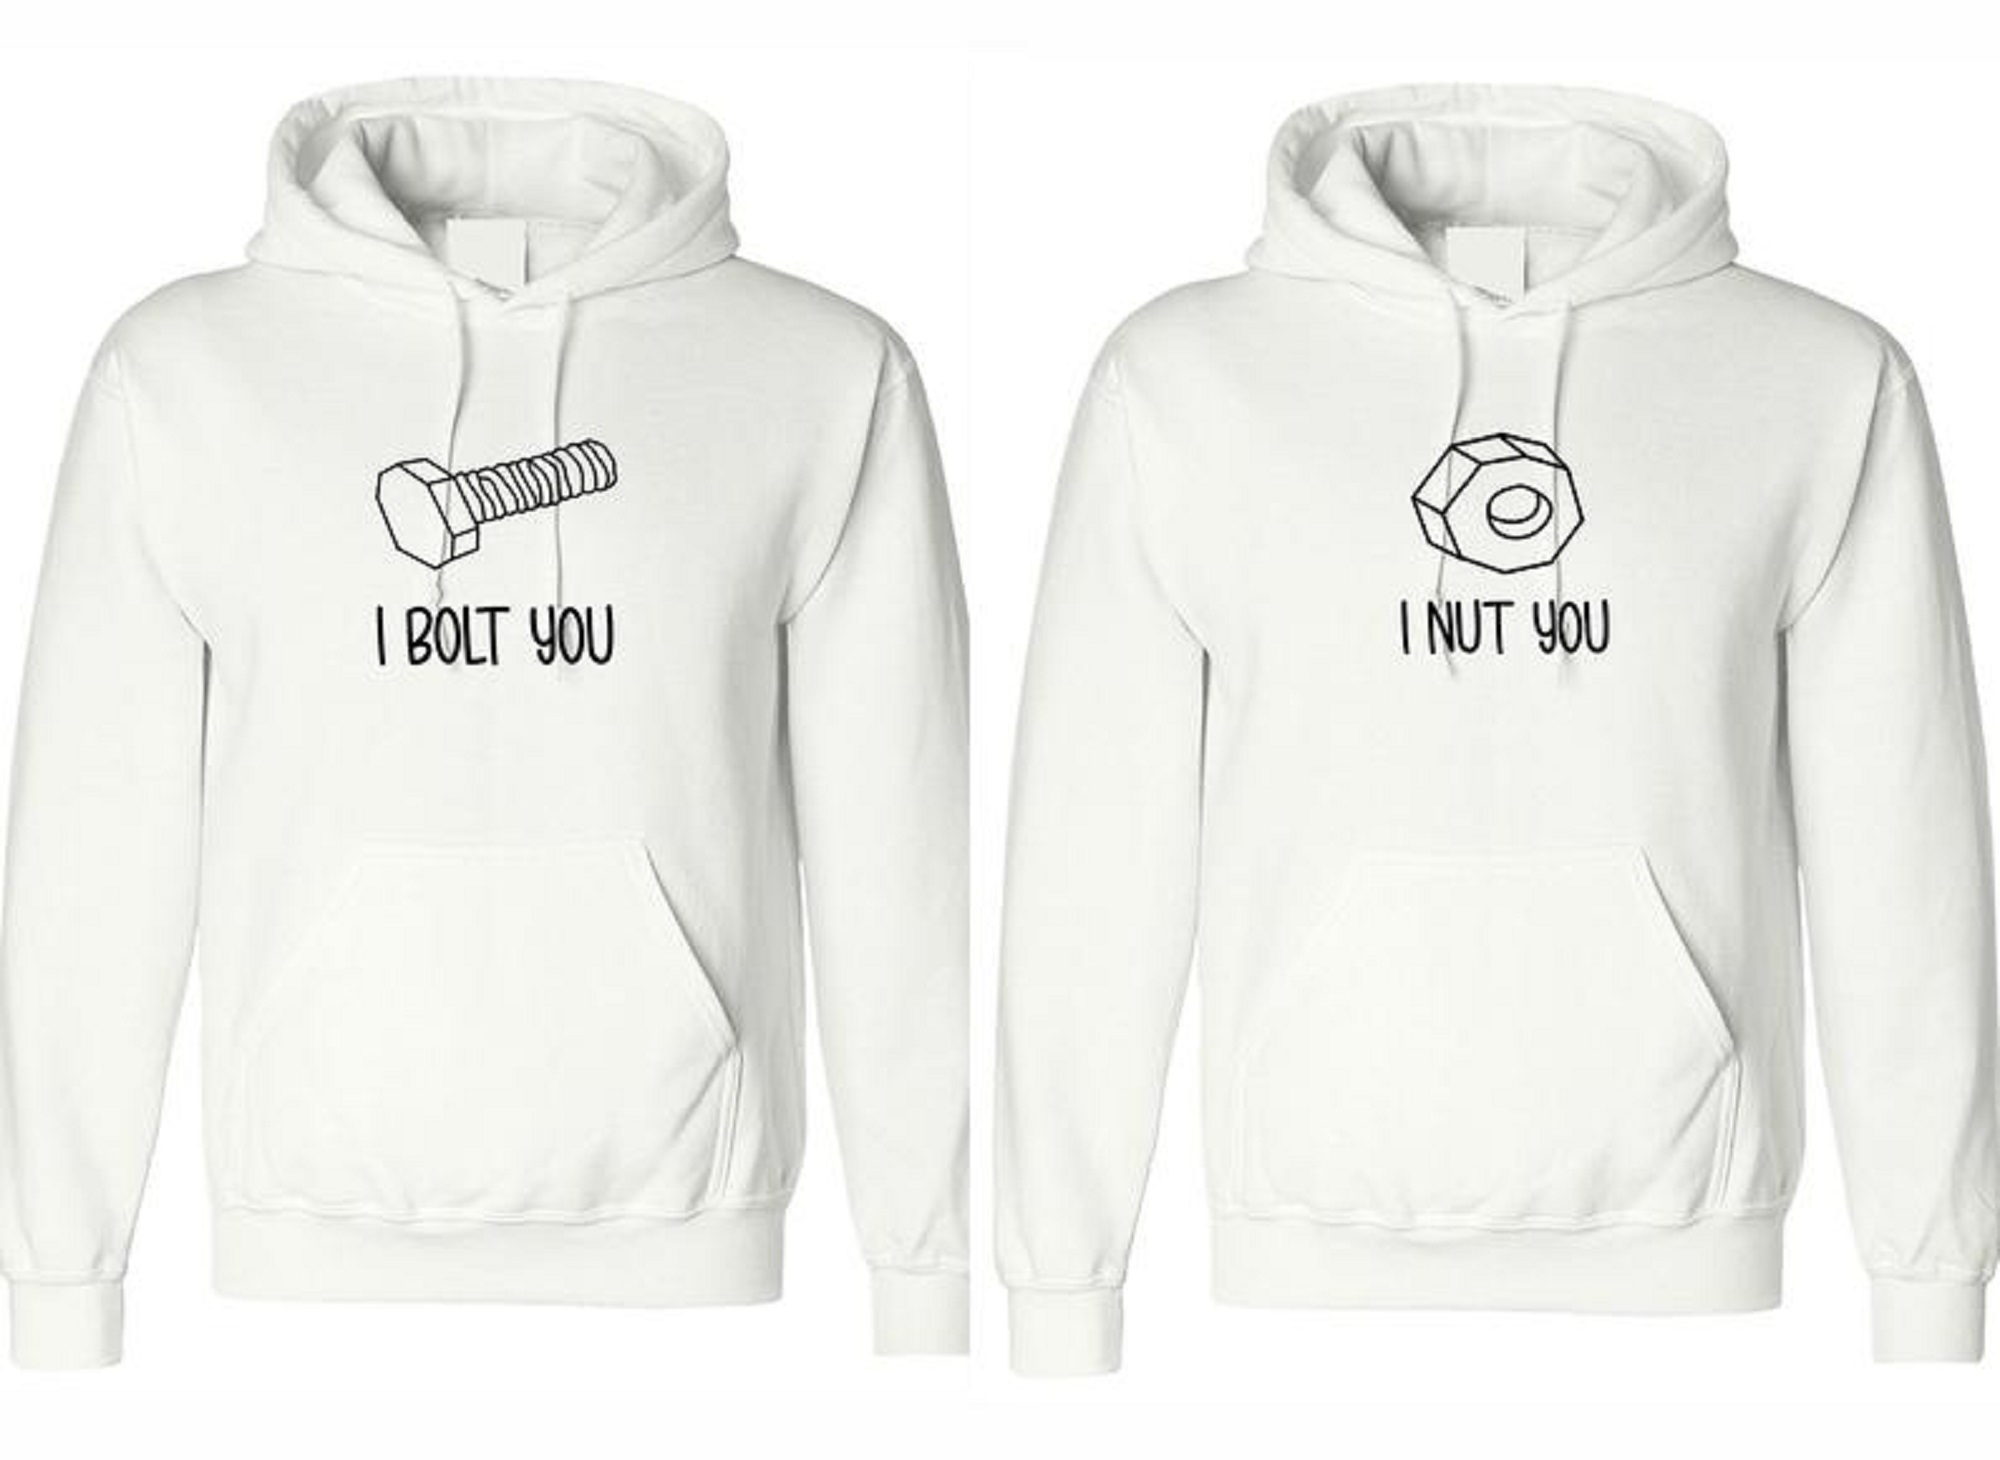 Nut and bolt cute design couple matching hoodies for anniversary